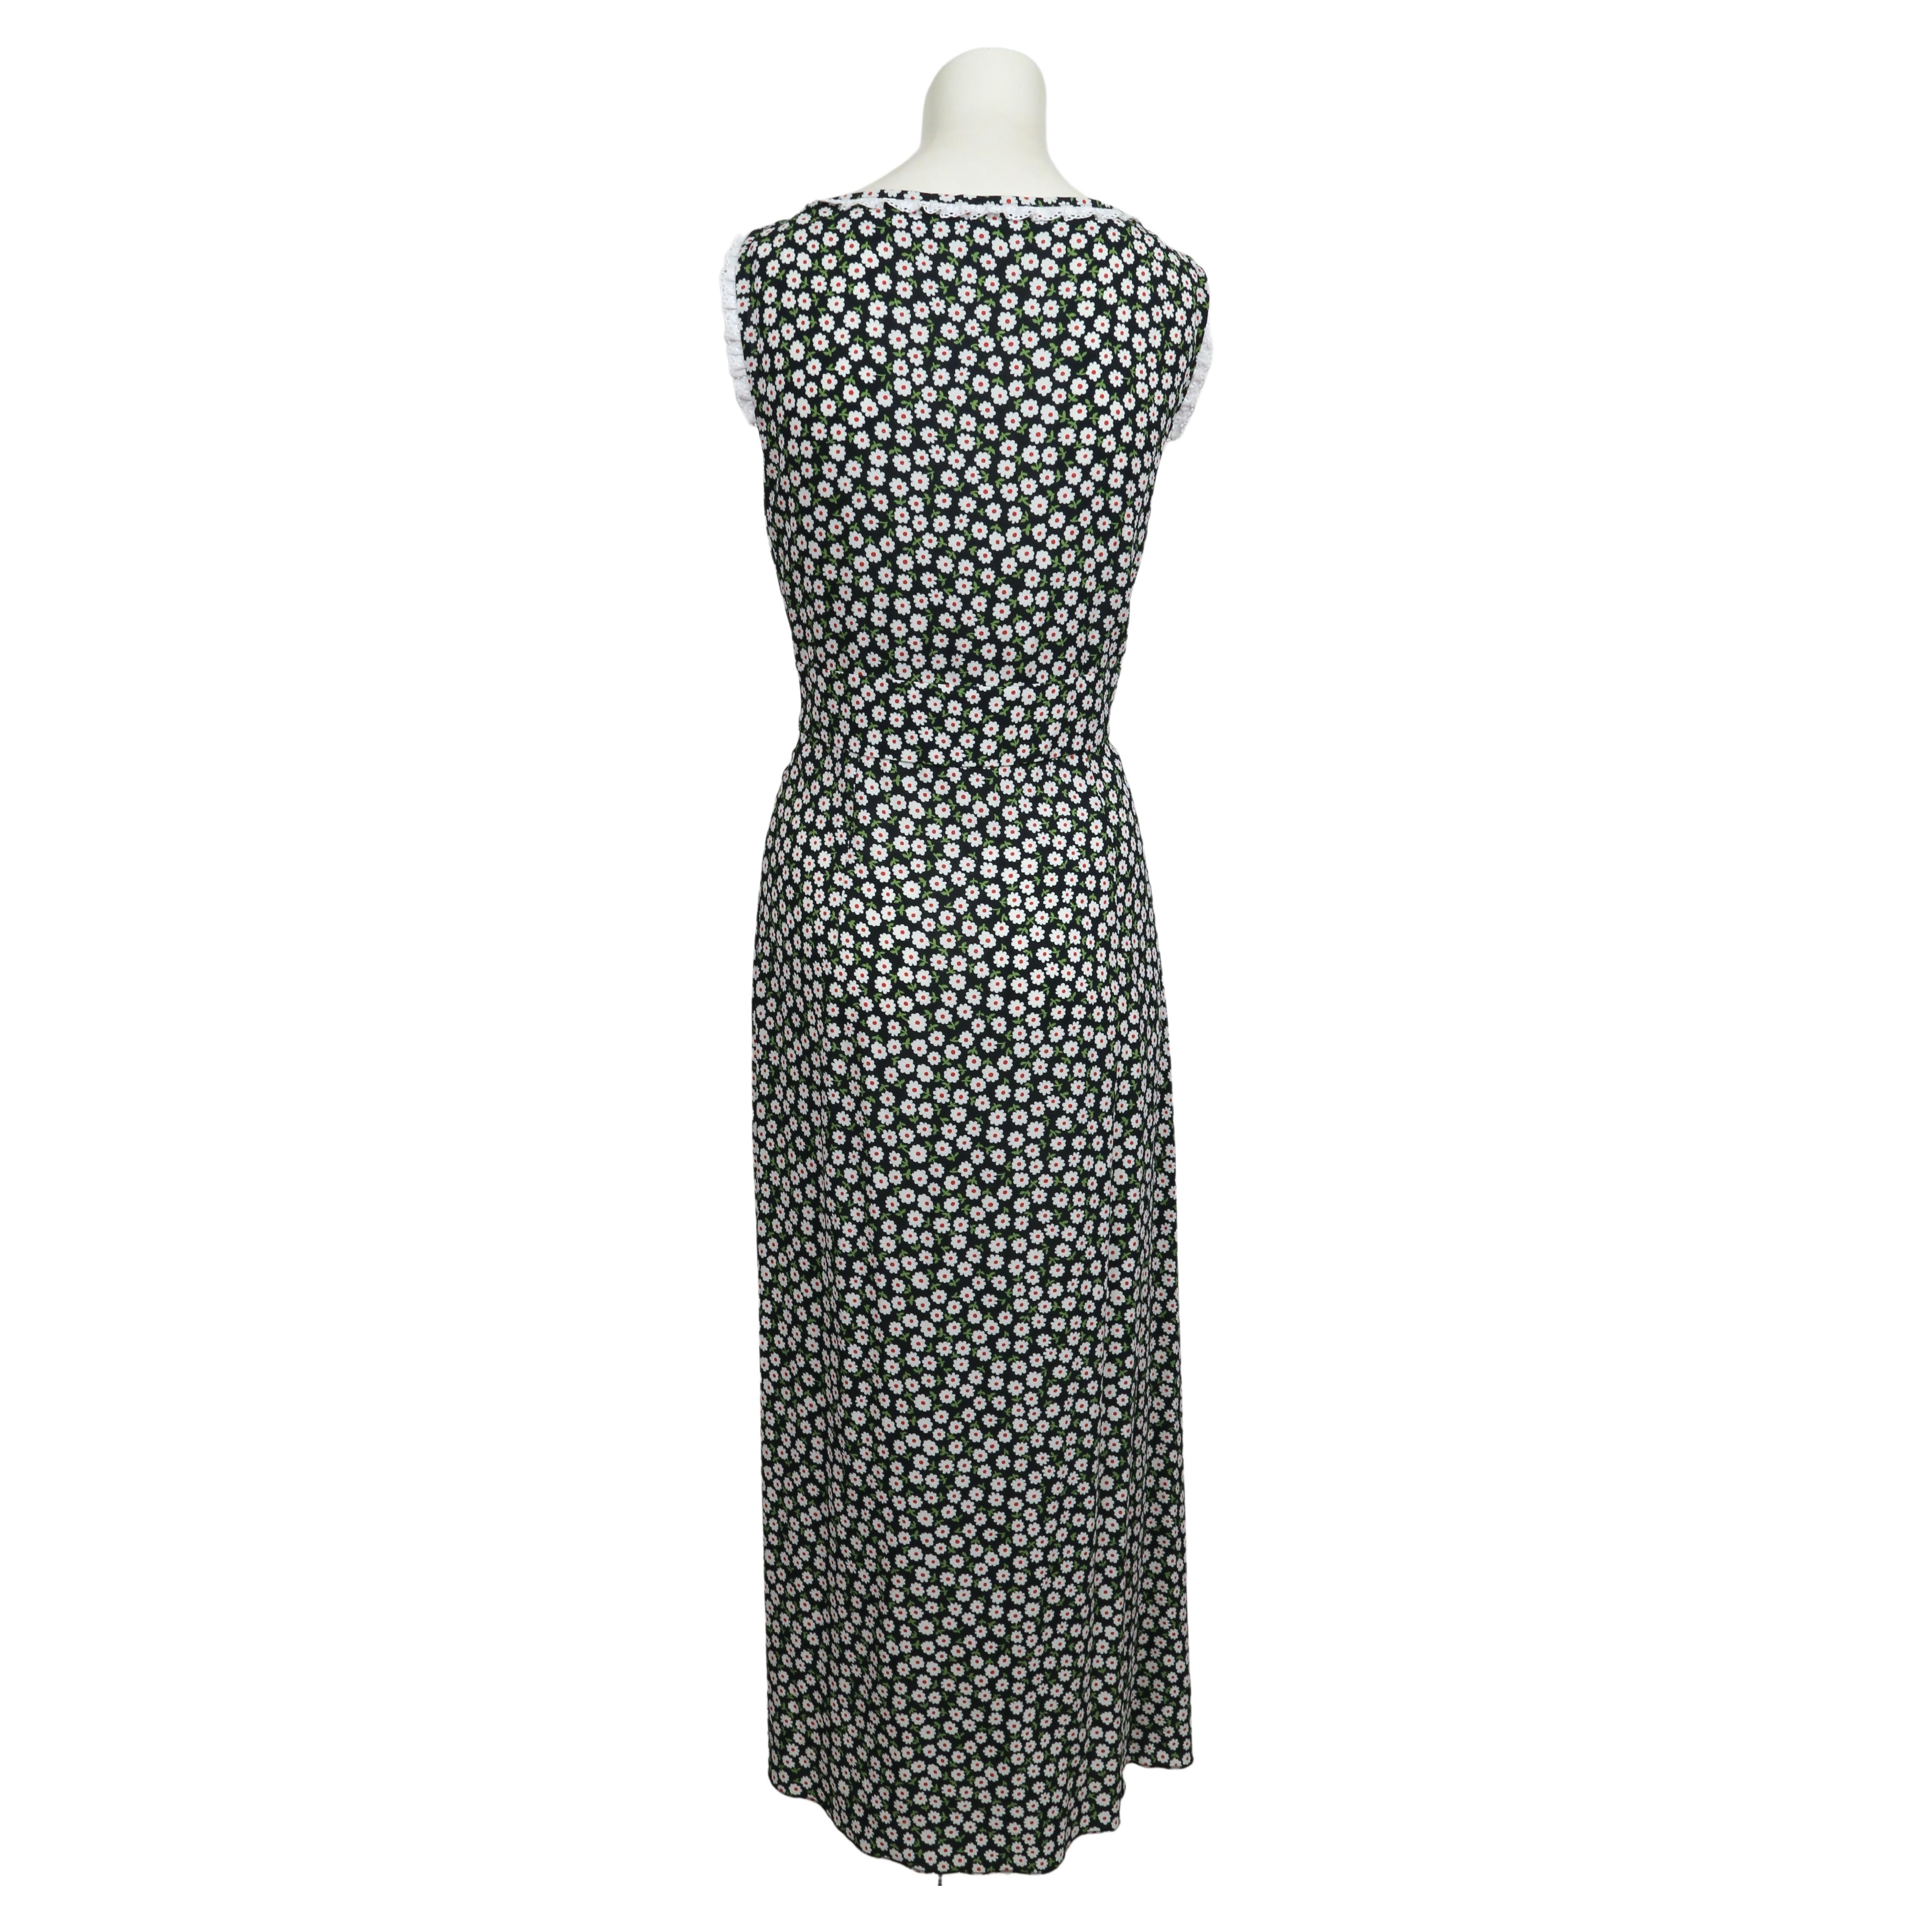 MIU MIU floral maxi dress with Broderie Anglaise lace trim For Sale 2